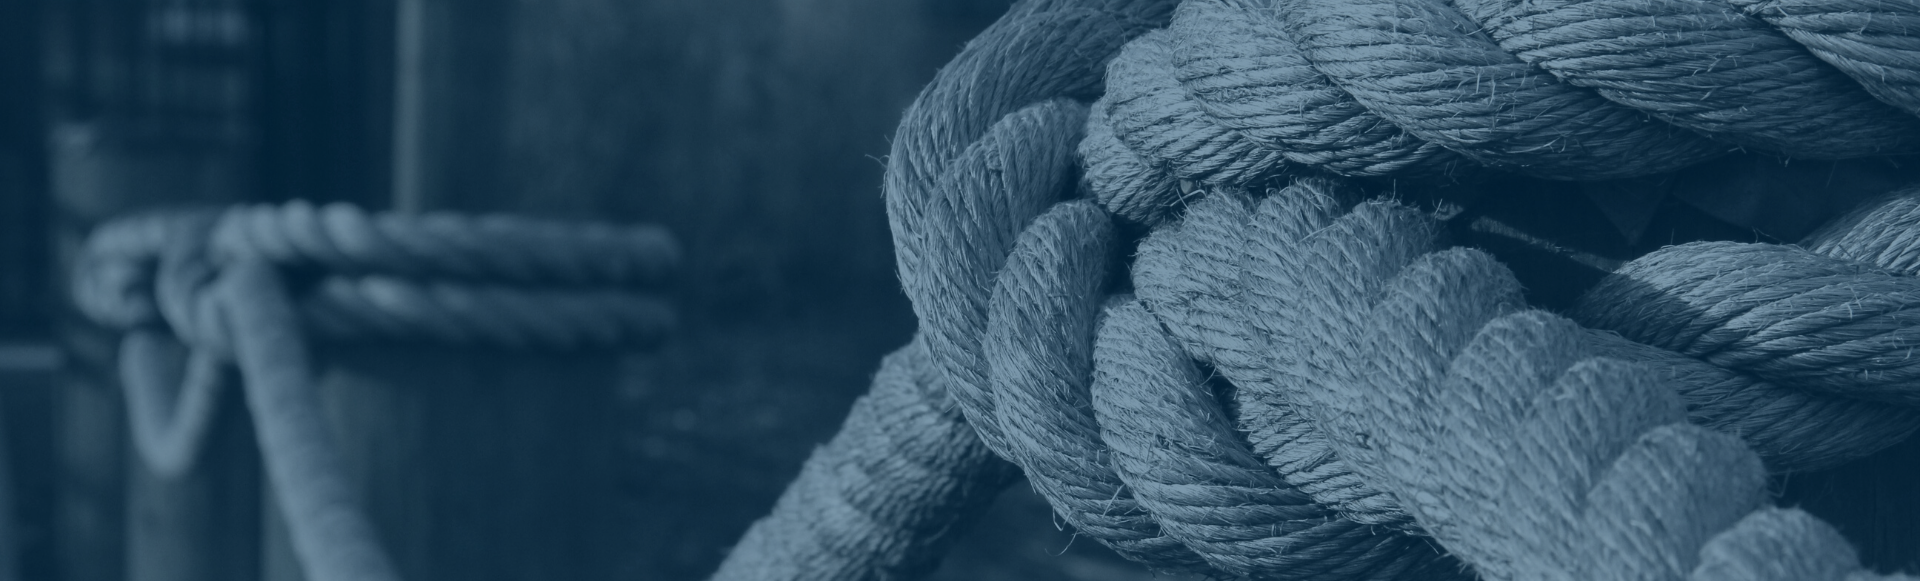 Ropes securing a dock